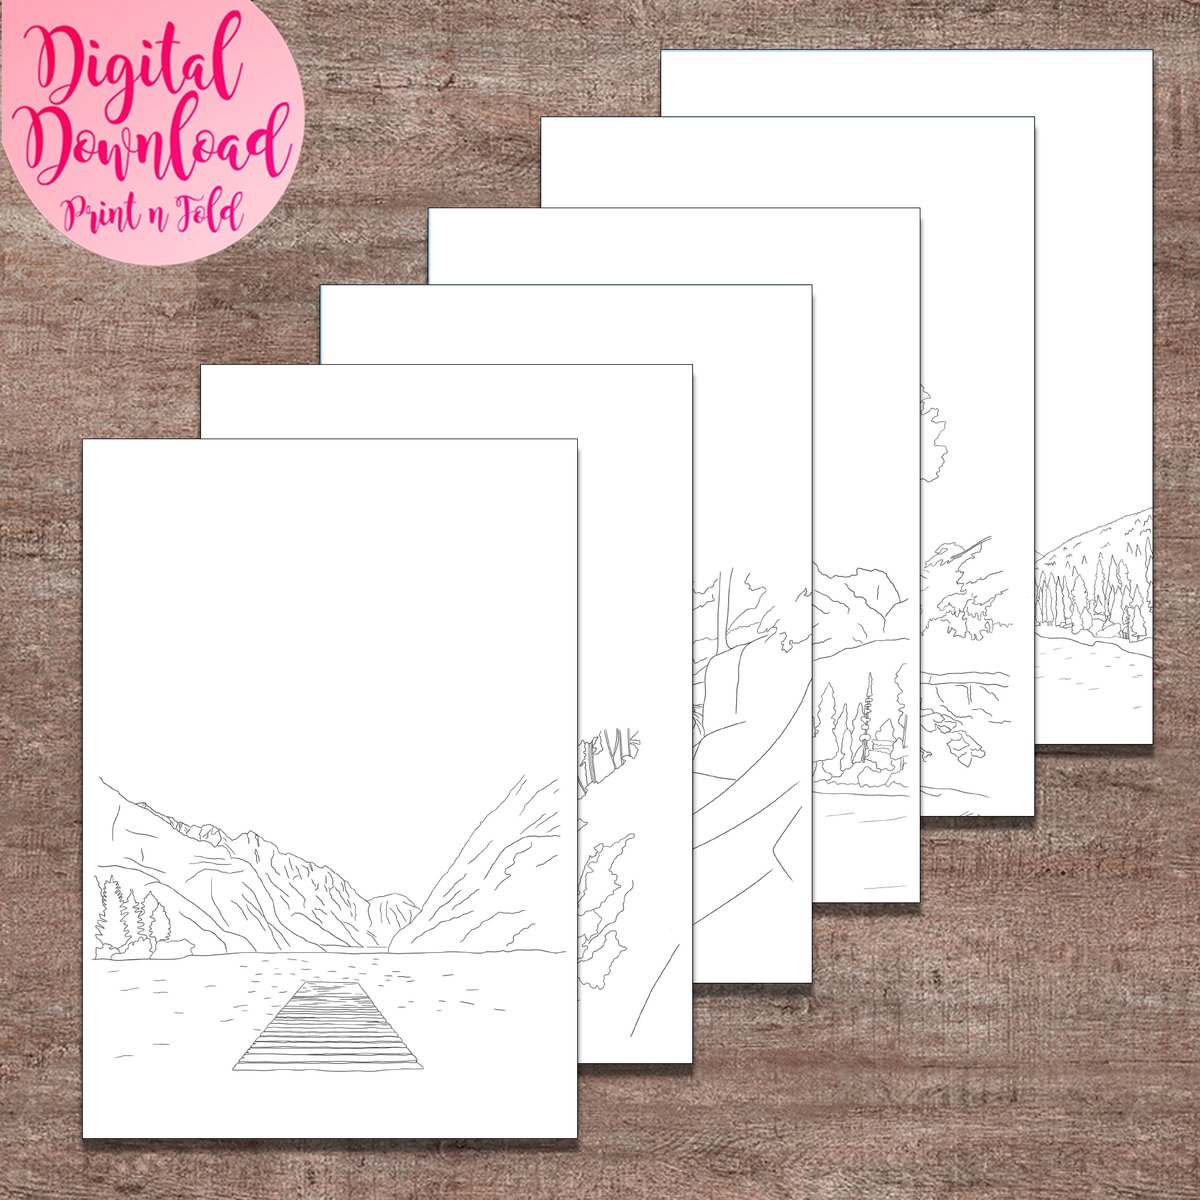 Put some nature into it

etsy.me/3UVhuyL 

#plannerpages #landscape #titlepages #printable #mentalhealth #adultcolouring #printityourself #journaling #sale #discount